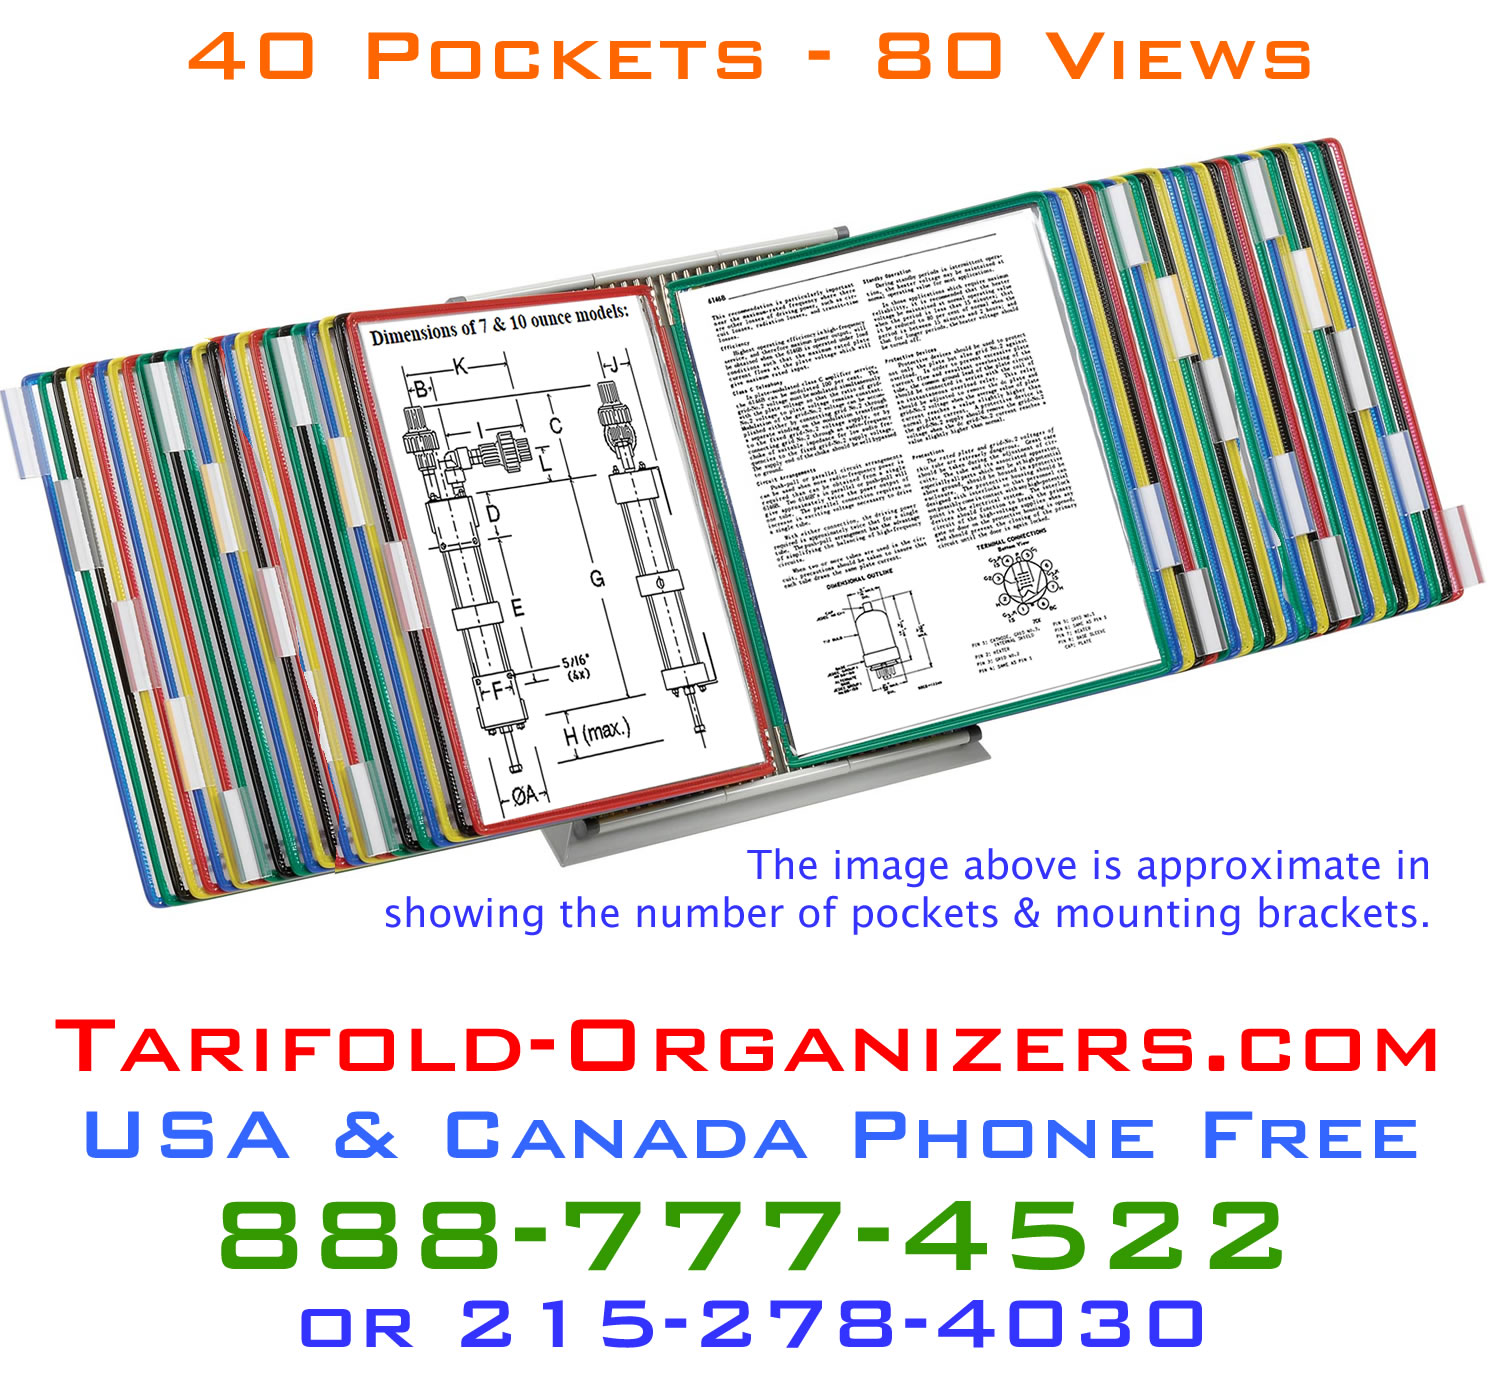 Business depends on Tarifold Organizers to do just that- get organized and stay organized.